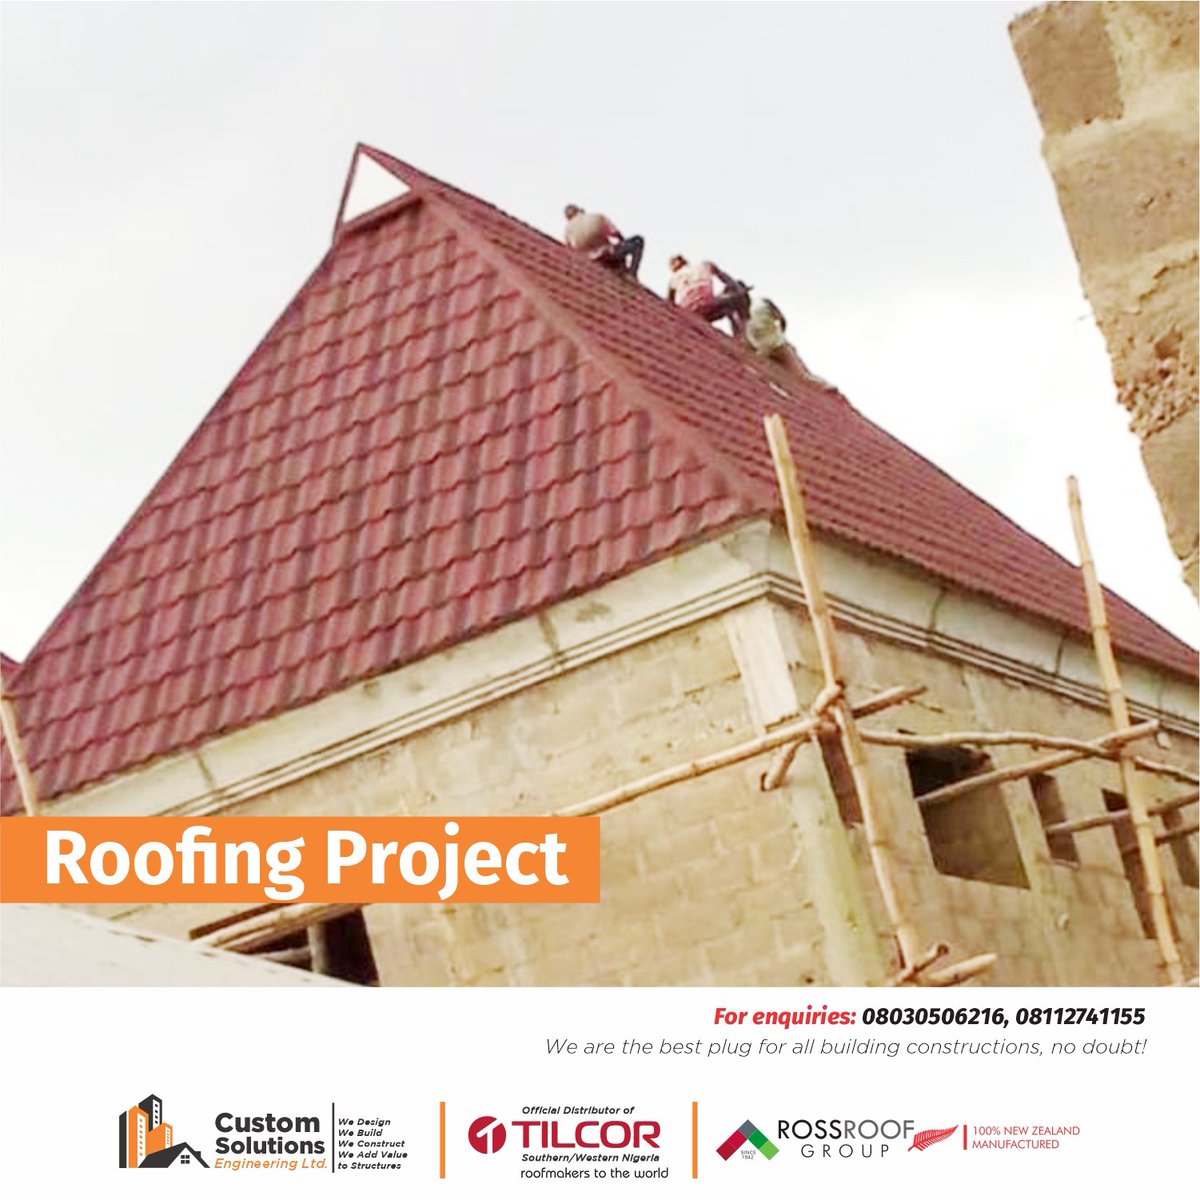 IT'S FRIDAY

POLYSTRENE BUILDING MATERIALS
NOW AVAILABLE!
* POP Polystrene
* Polystrene Paraphet 
* Polystrene Wall Panels 
*Polystrene Window Hood
Also available 
* Roofing Materials

#customsolutng #csetilcor  #tilcor #roofing #roofers #roofstructure #fridaymood #tgif